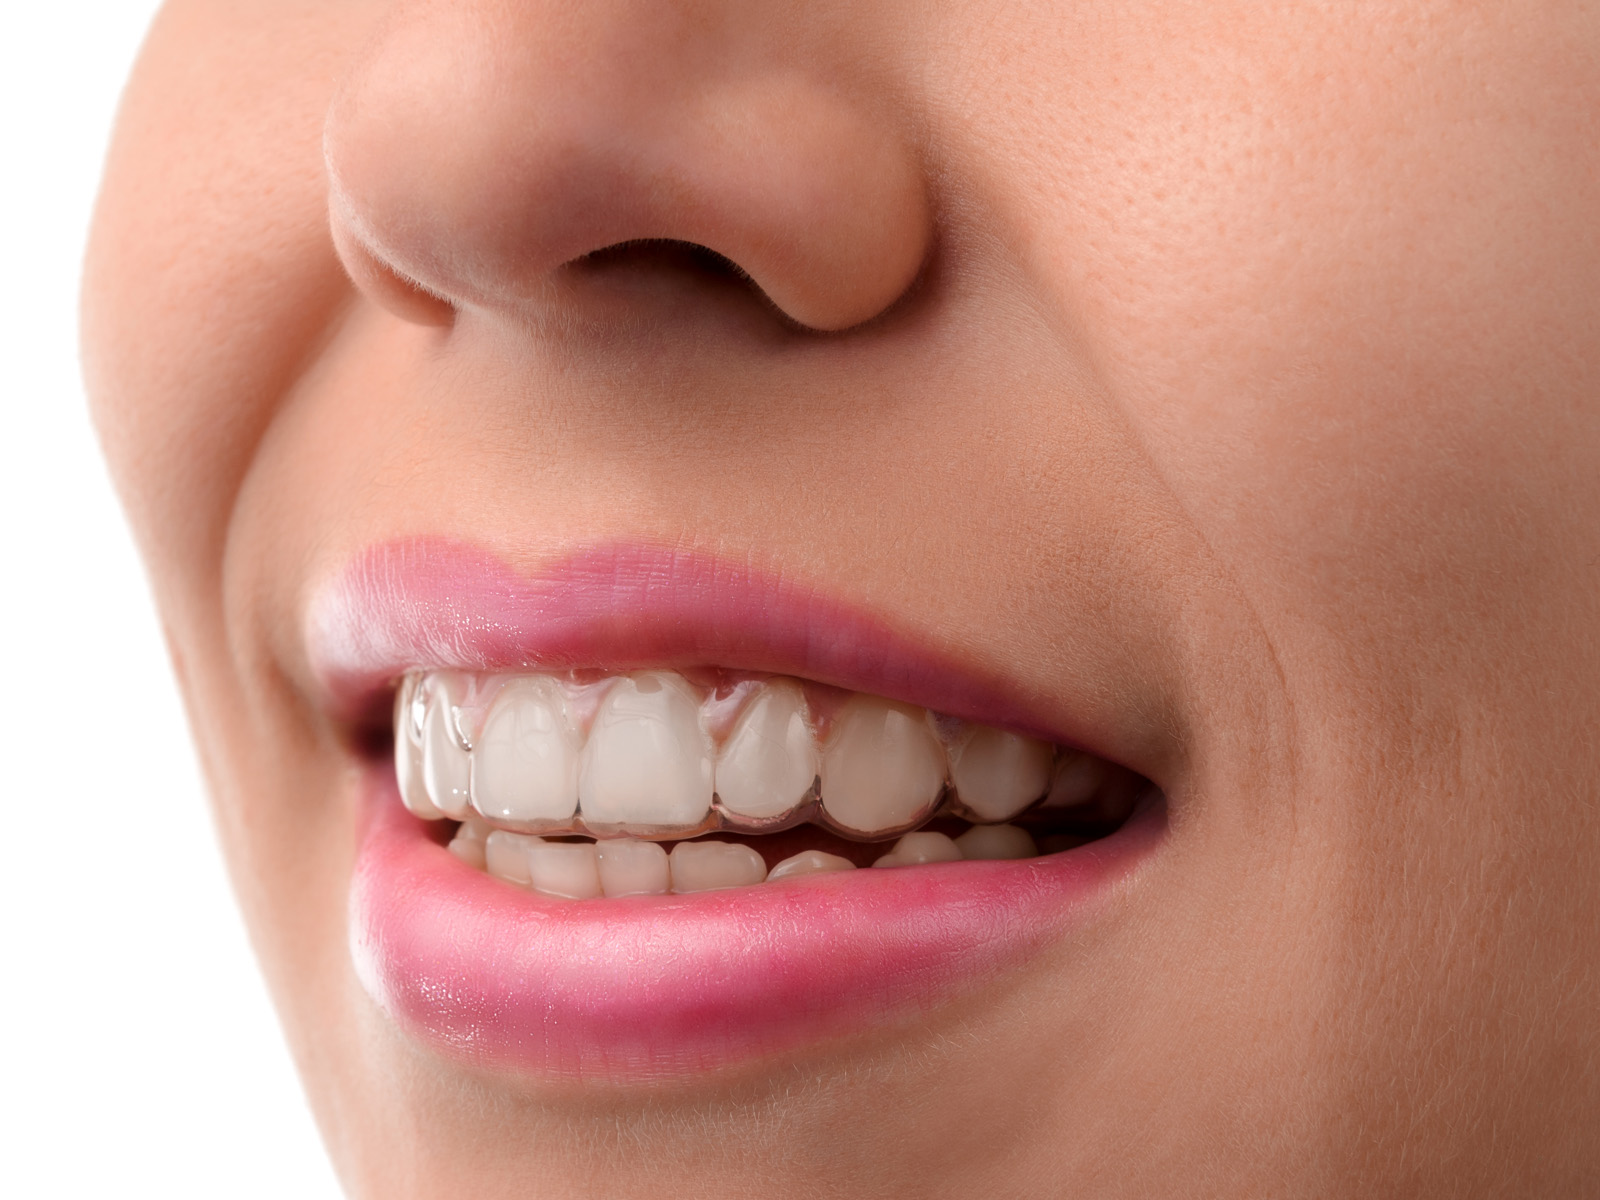 Does Invisalign make your breath smell?